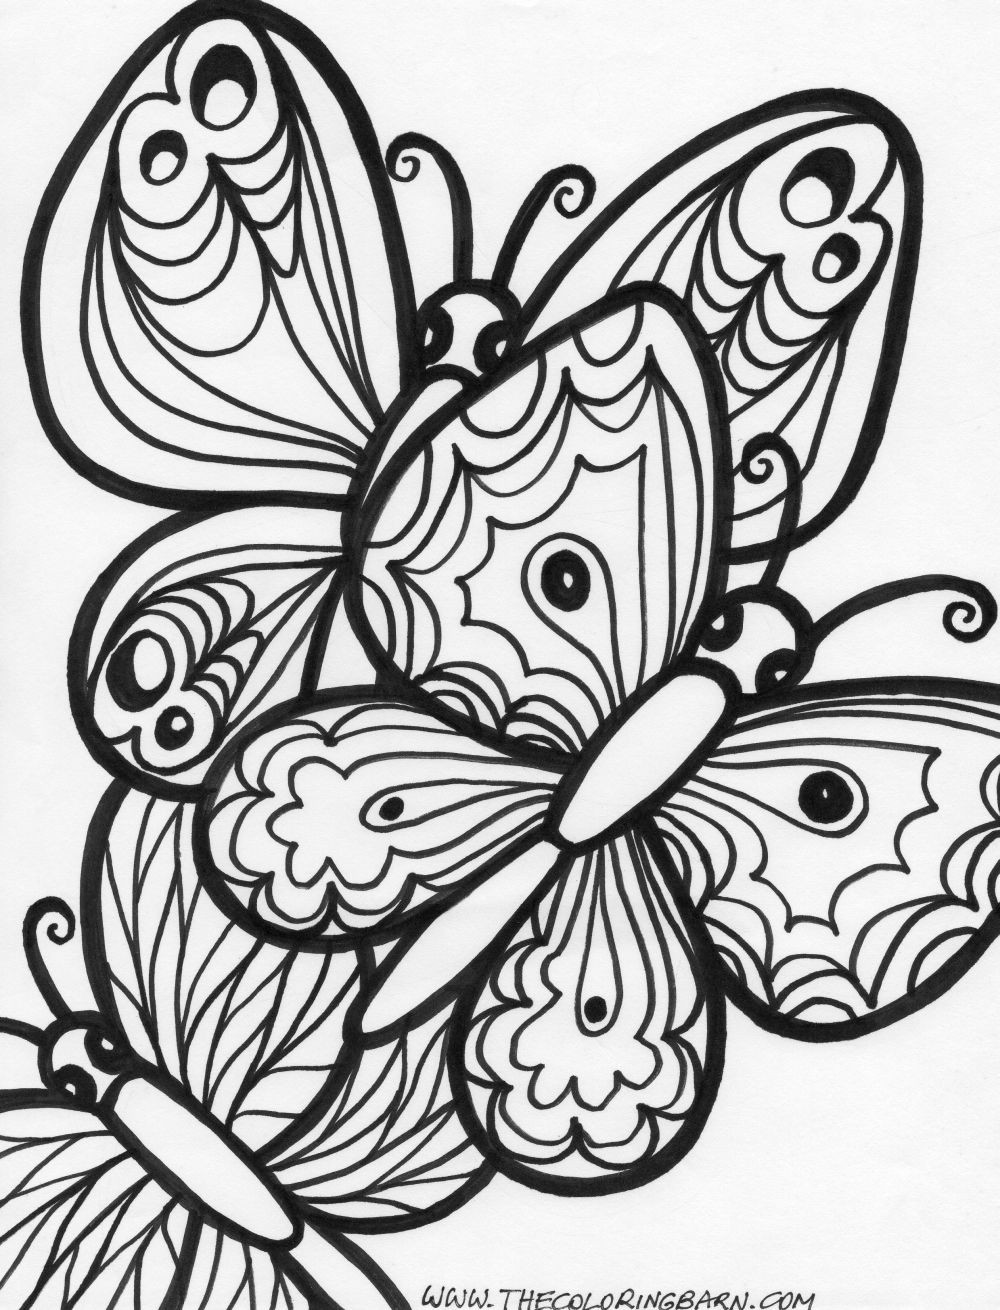 Butterfly Free Printable Coloring Sheets
 Butterfly Coloring Pages Bestofcoloring